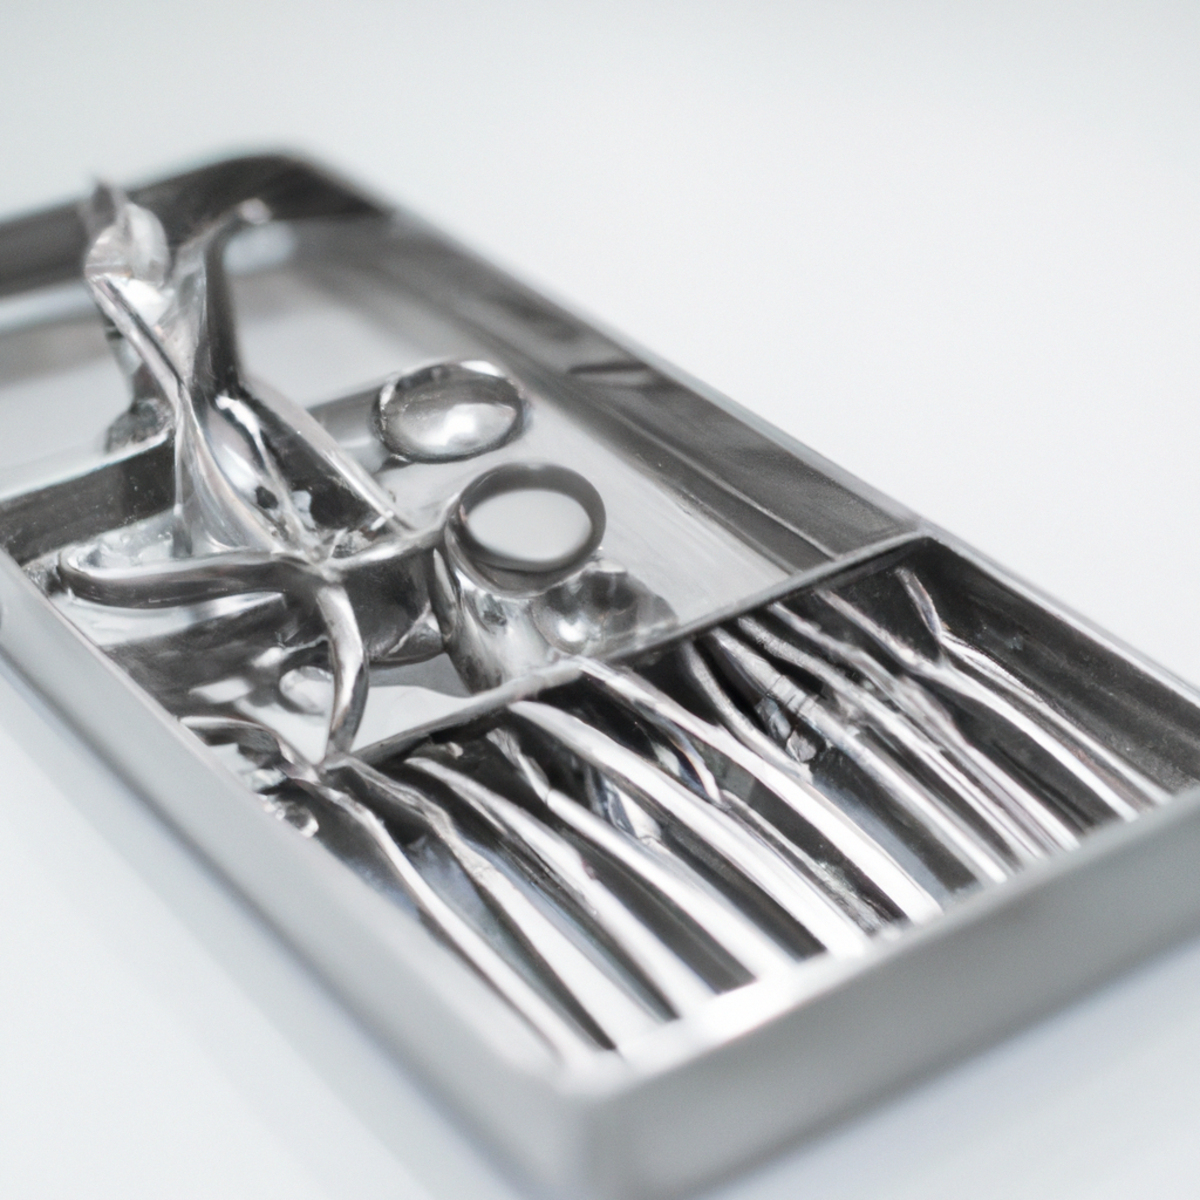 Close-up view of surgical instrument tray with stainless steel tools, including forceps delicately holding gallbladder model.